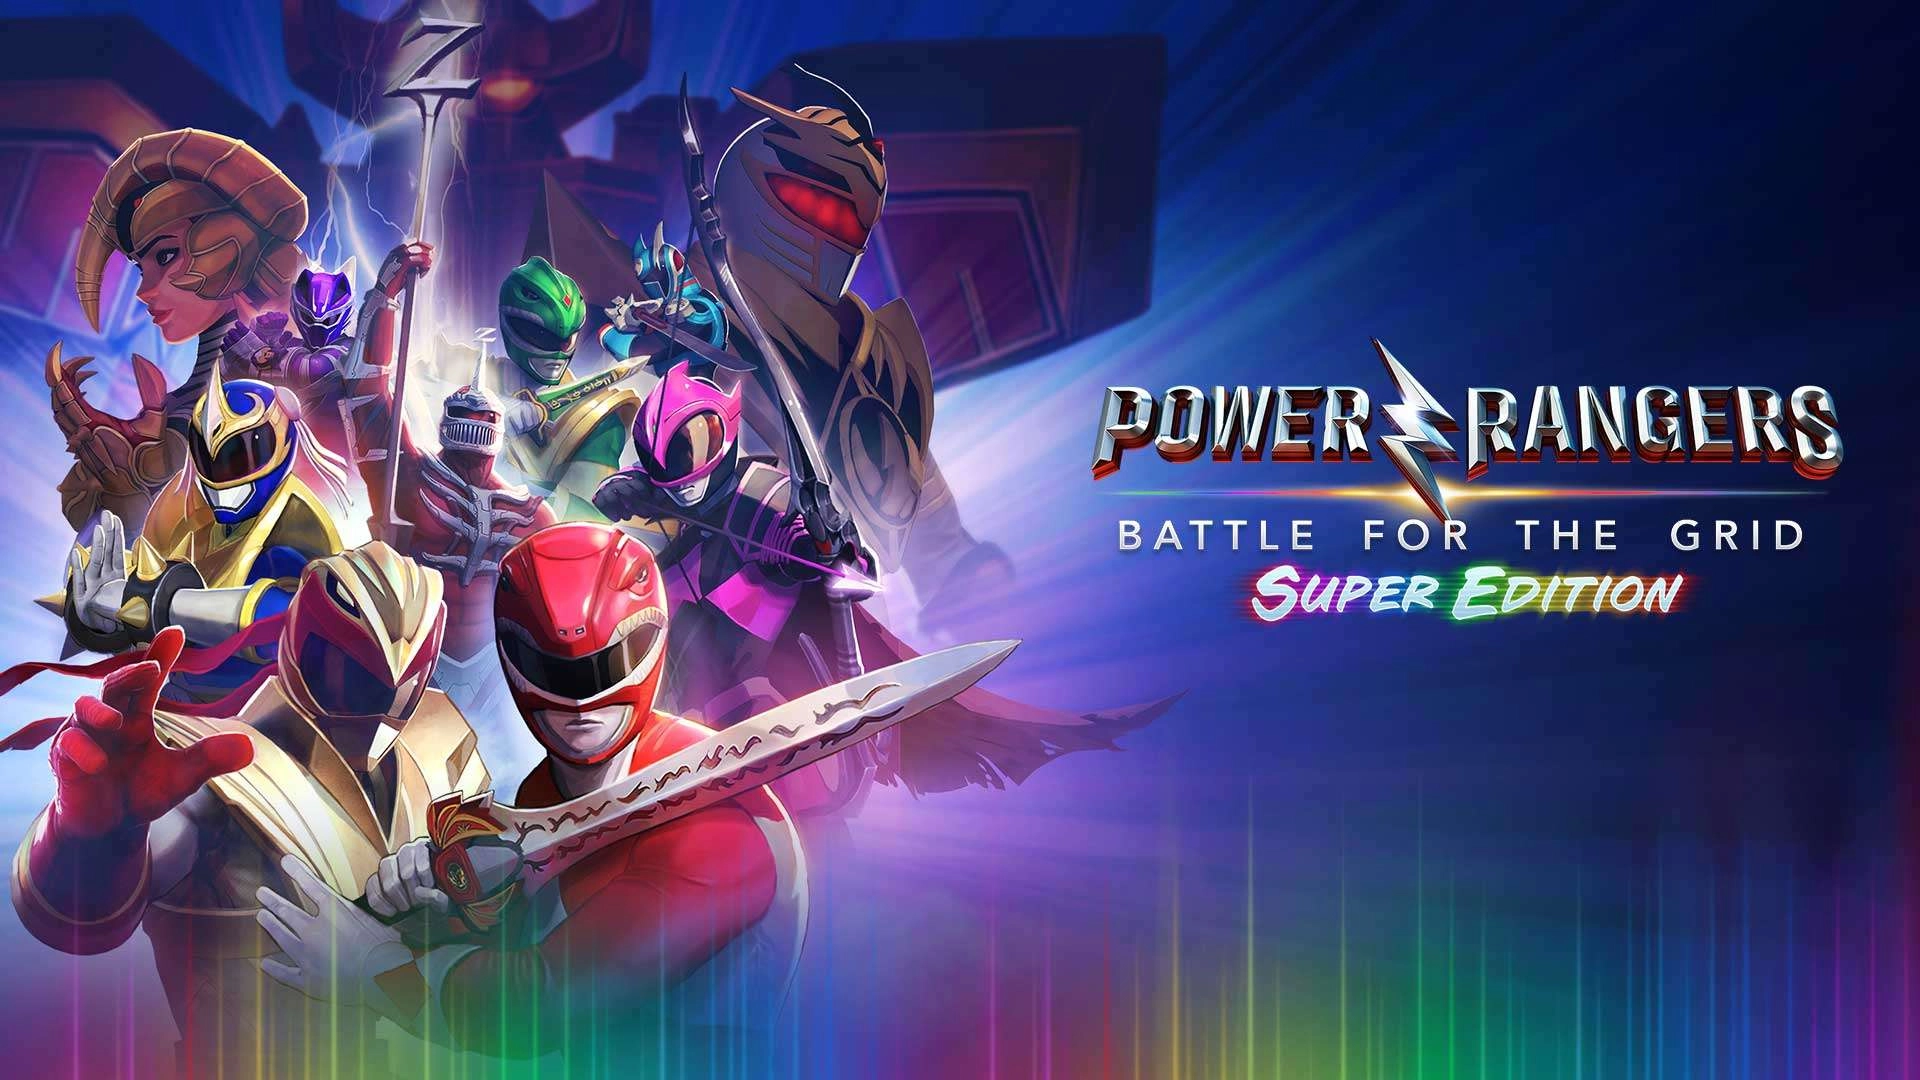 Power Rangers: Battle for the Grid Street Fighter Pack and Super Edition launch